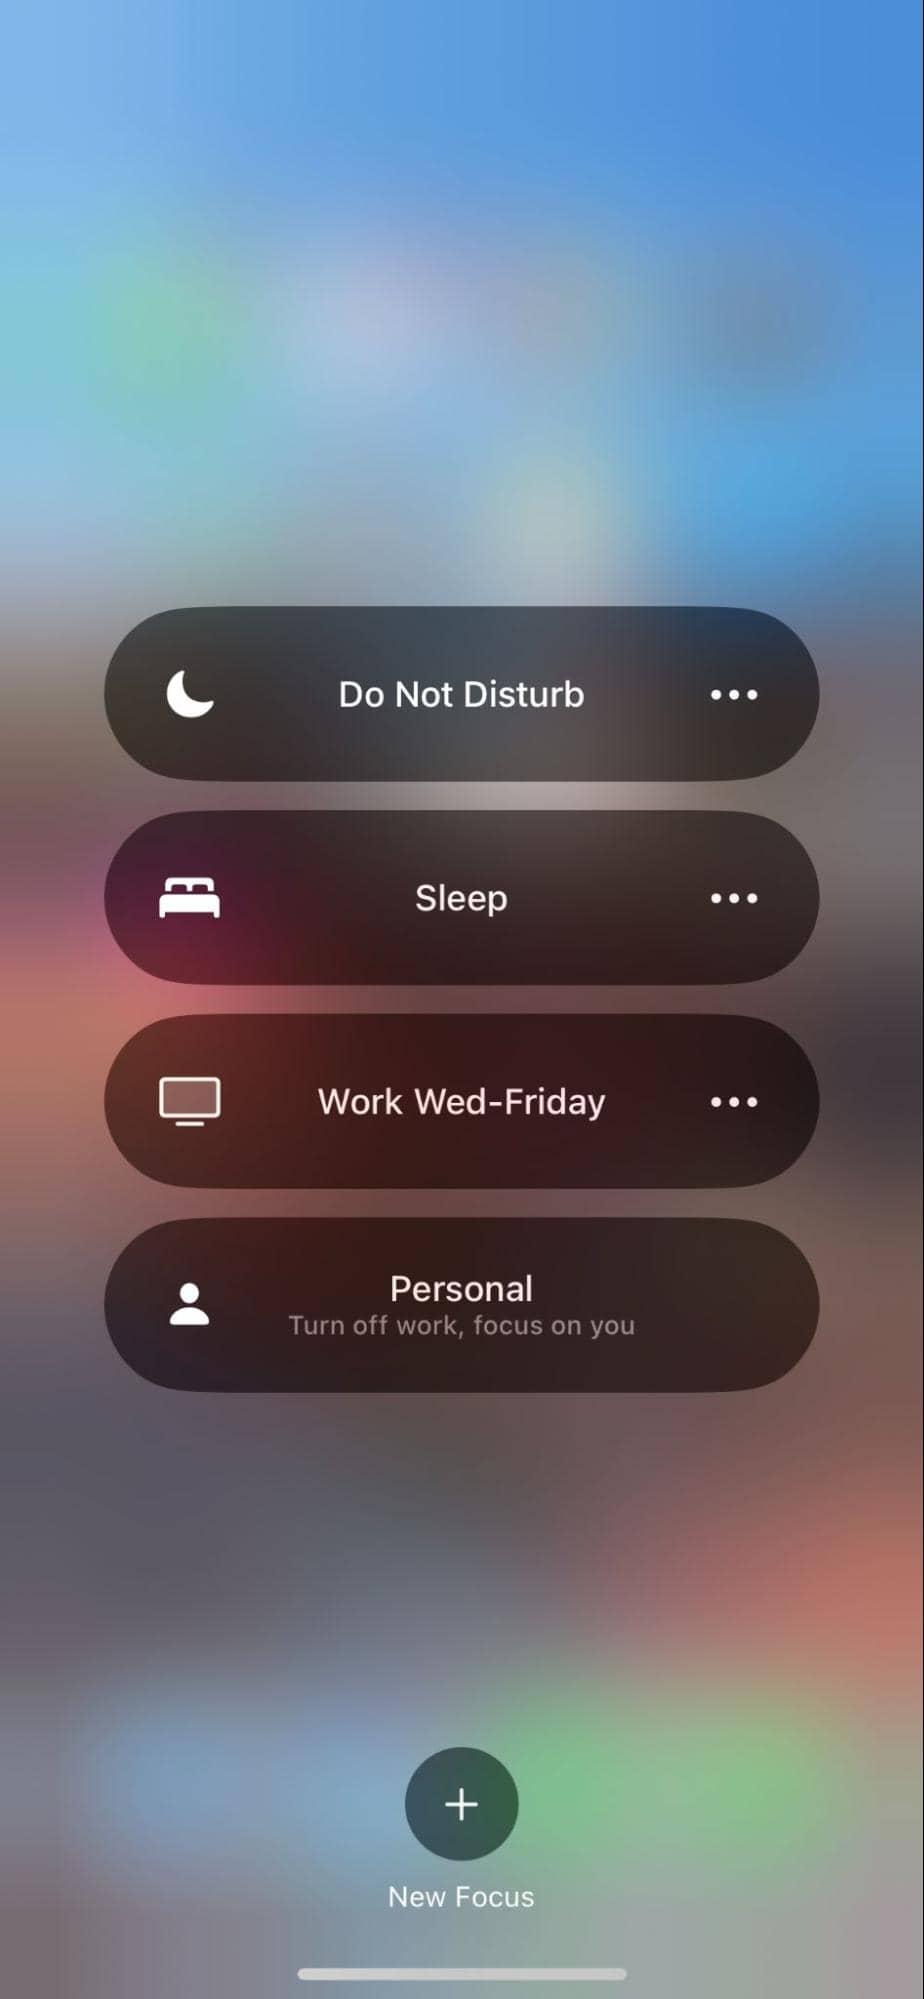 How to silence notifications on iPhone